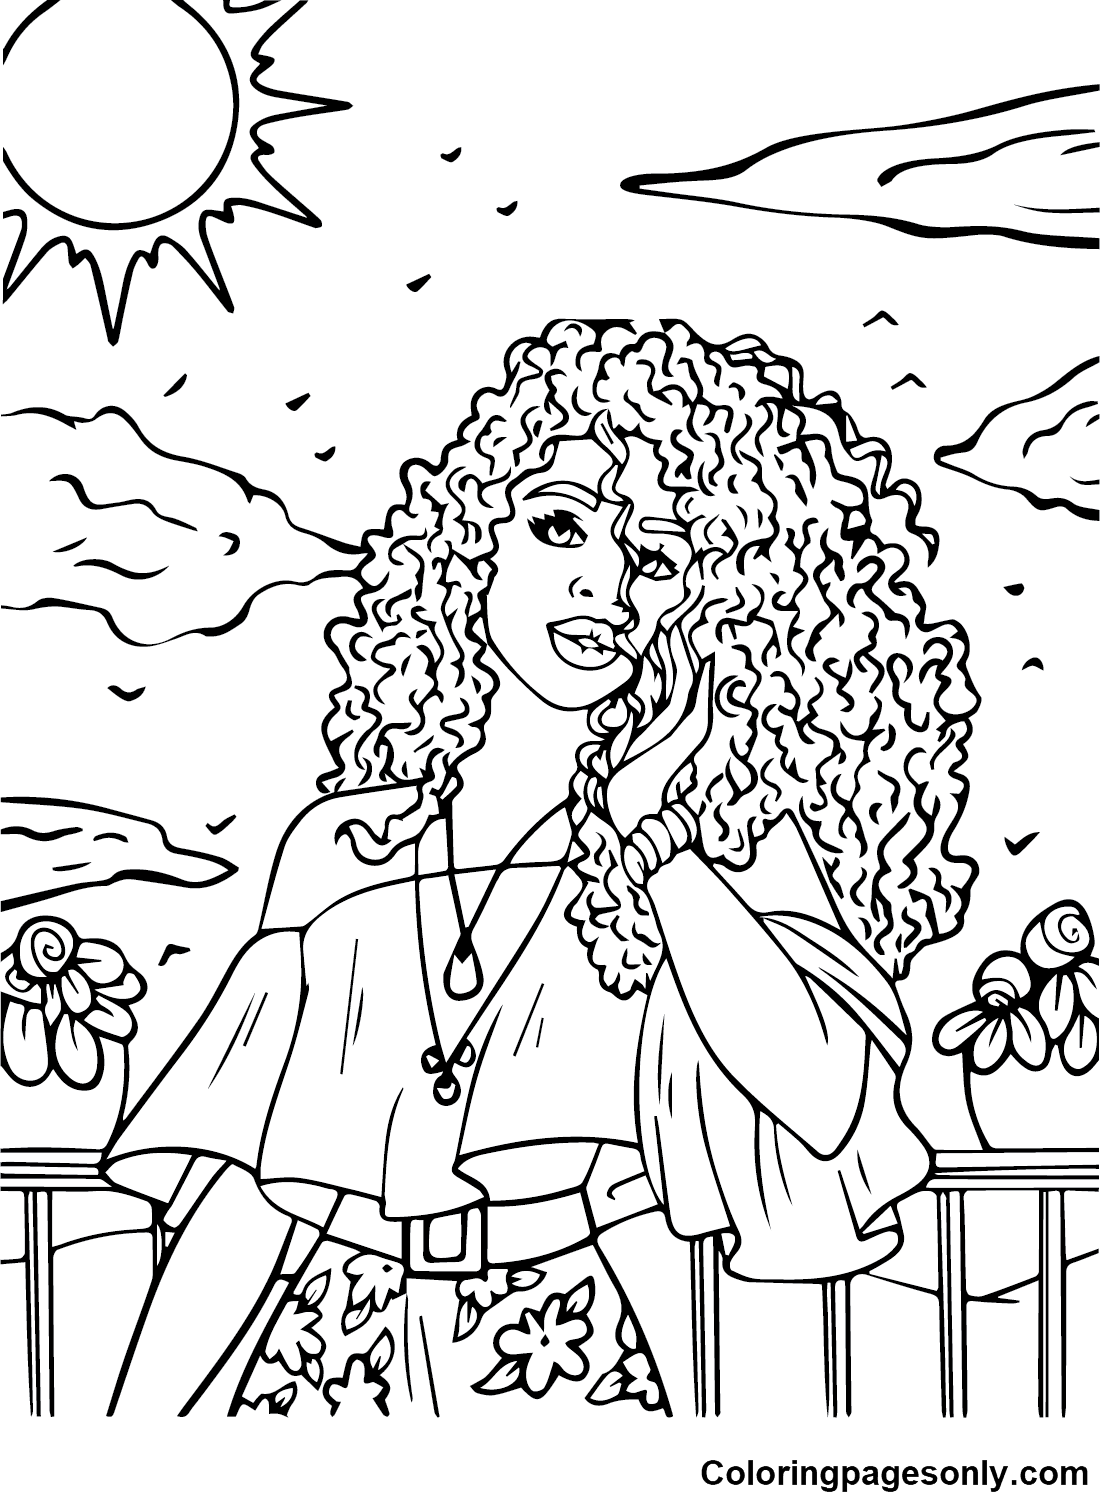 Images Halle Bailey Coloring Page